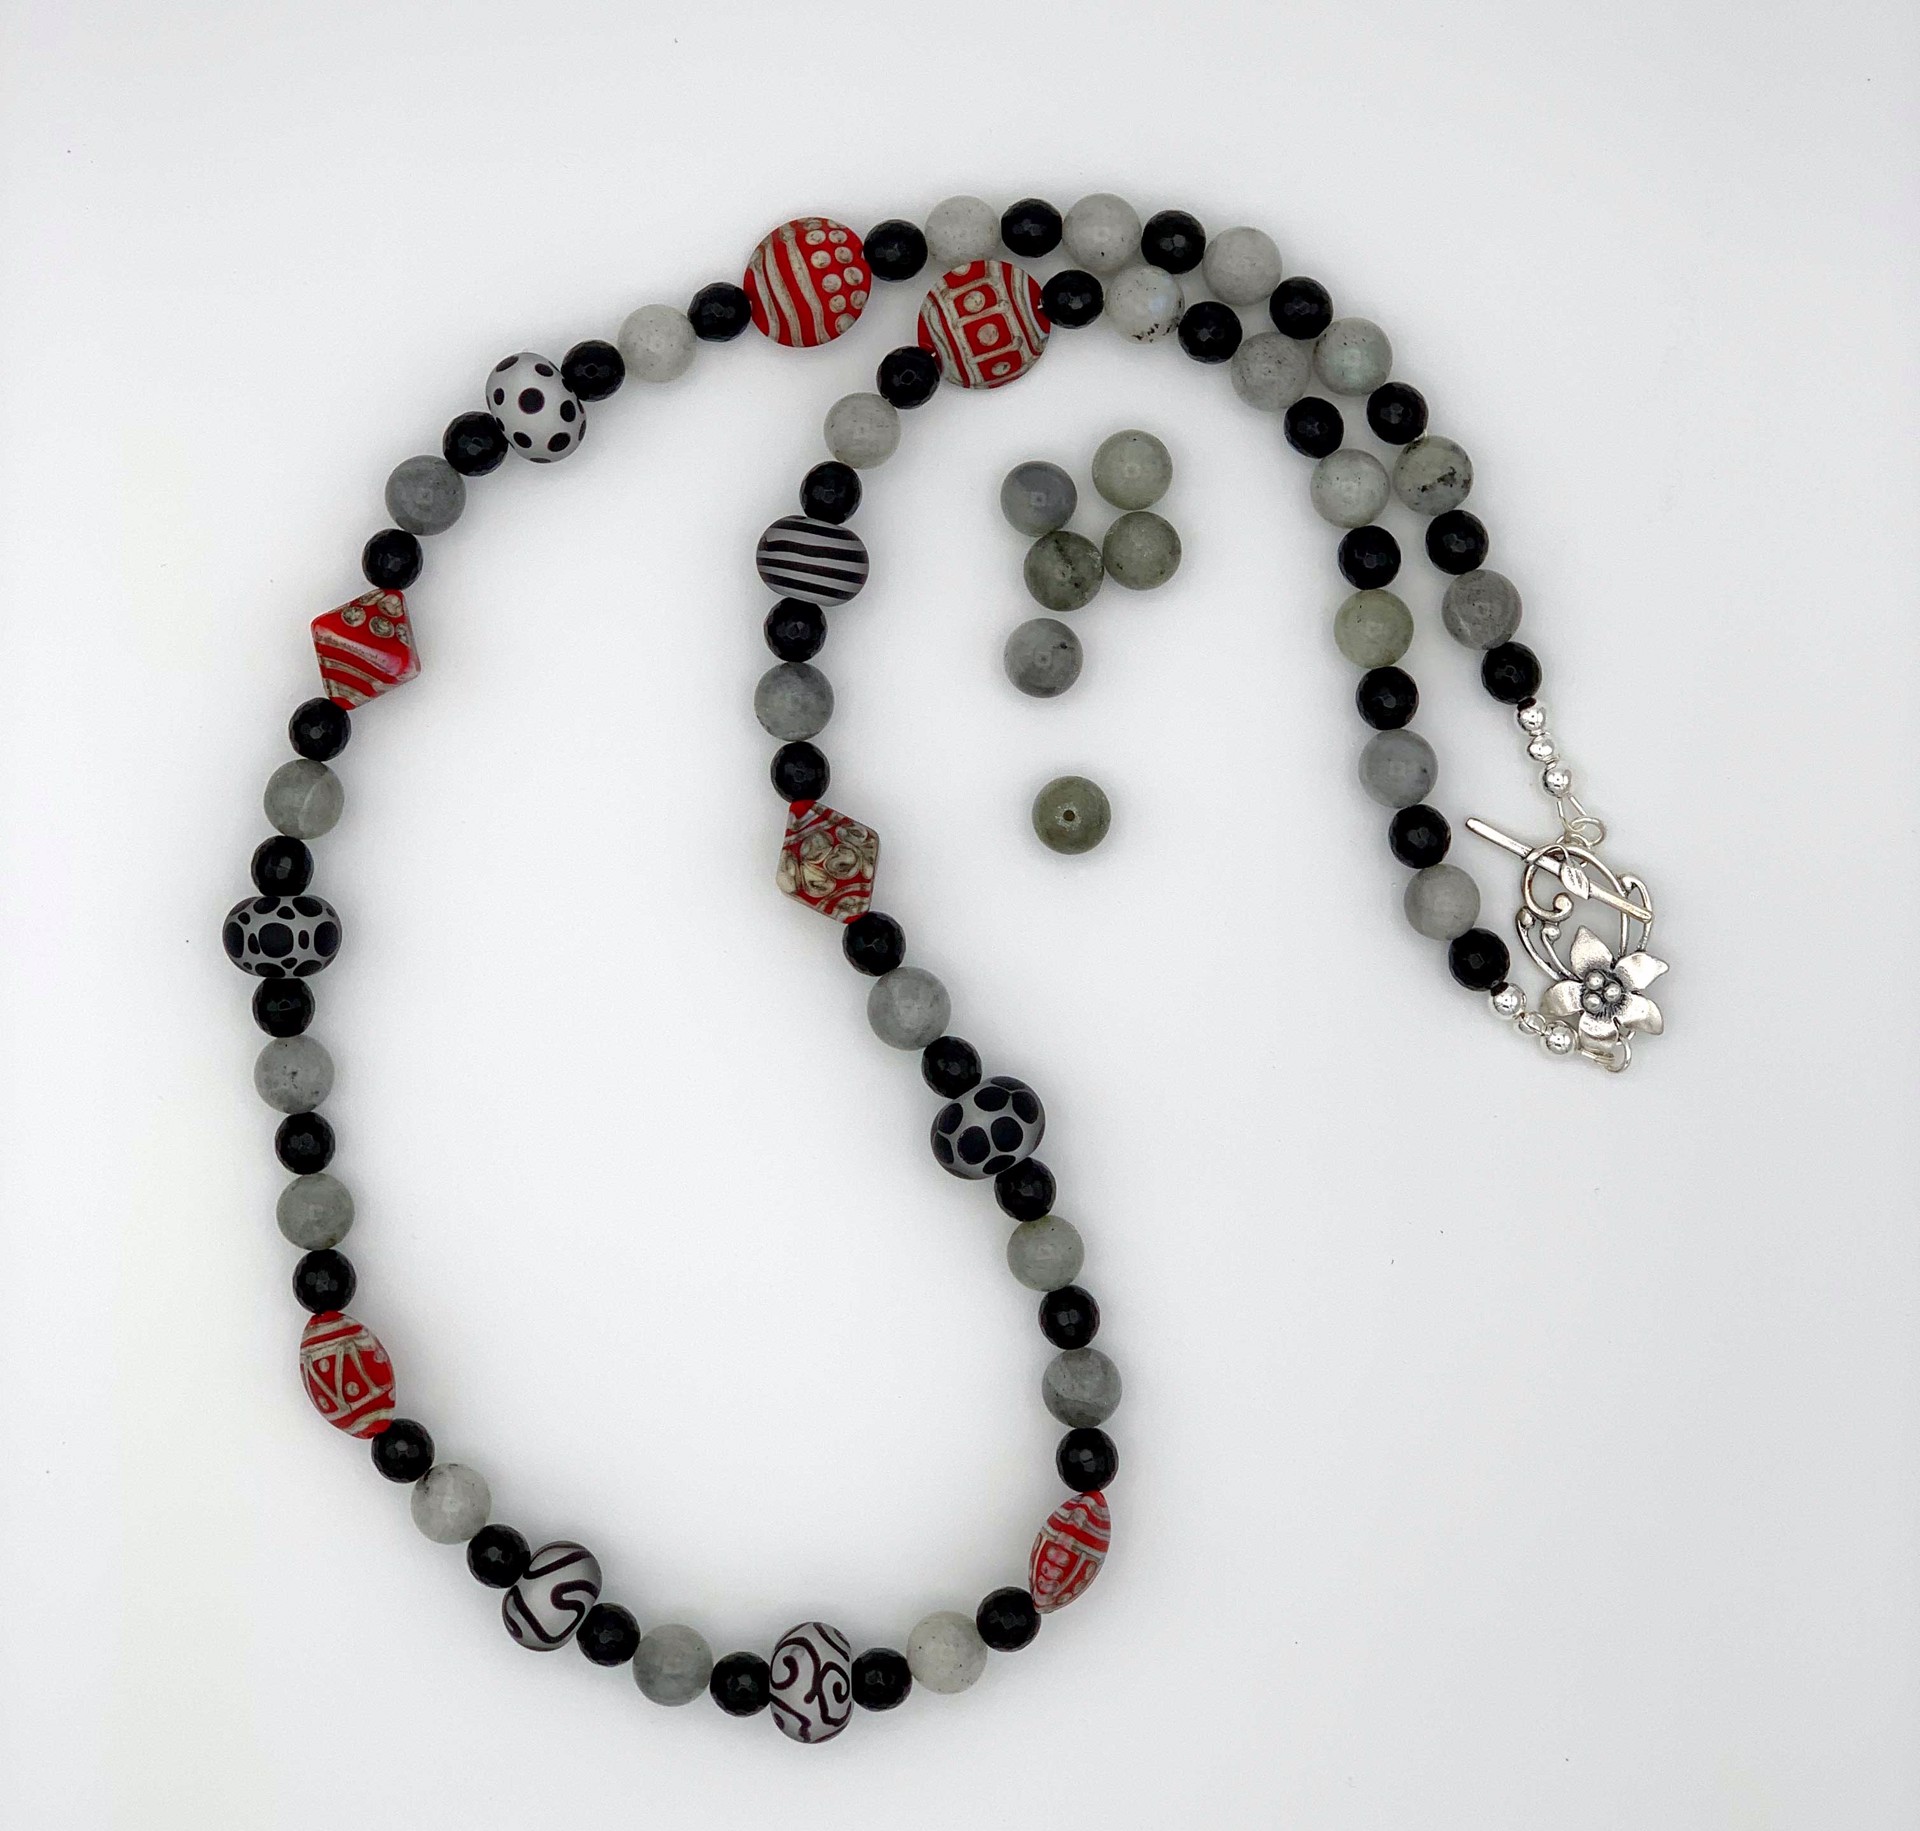 Semi-precious gemstone beads of Labradorite from Northeastern Canada and faceted Onyx add depth and class to the hand-torched glass focal beads.